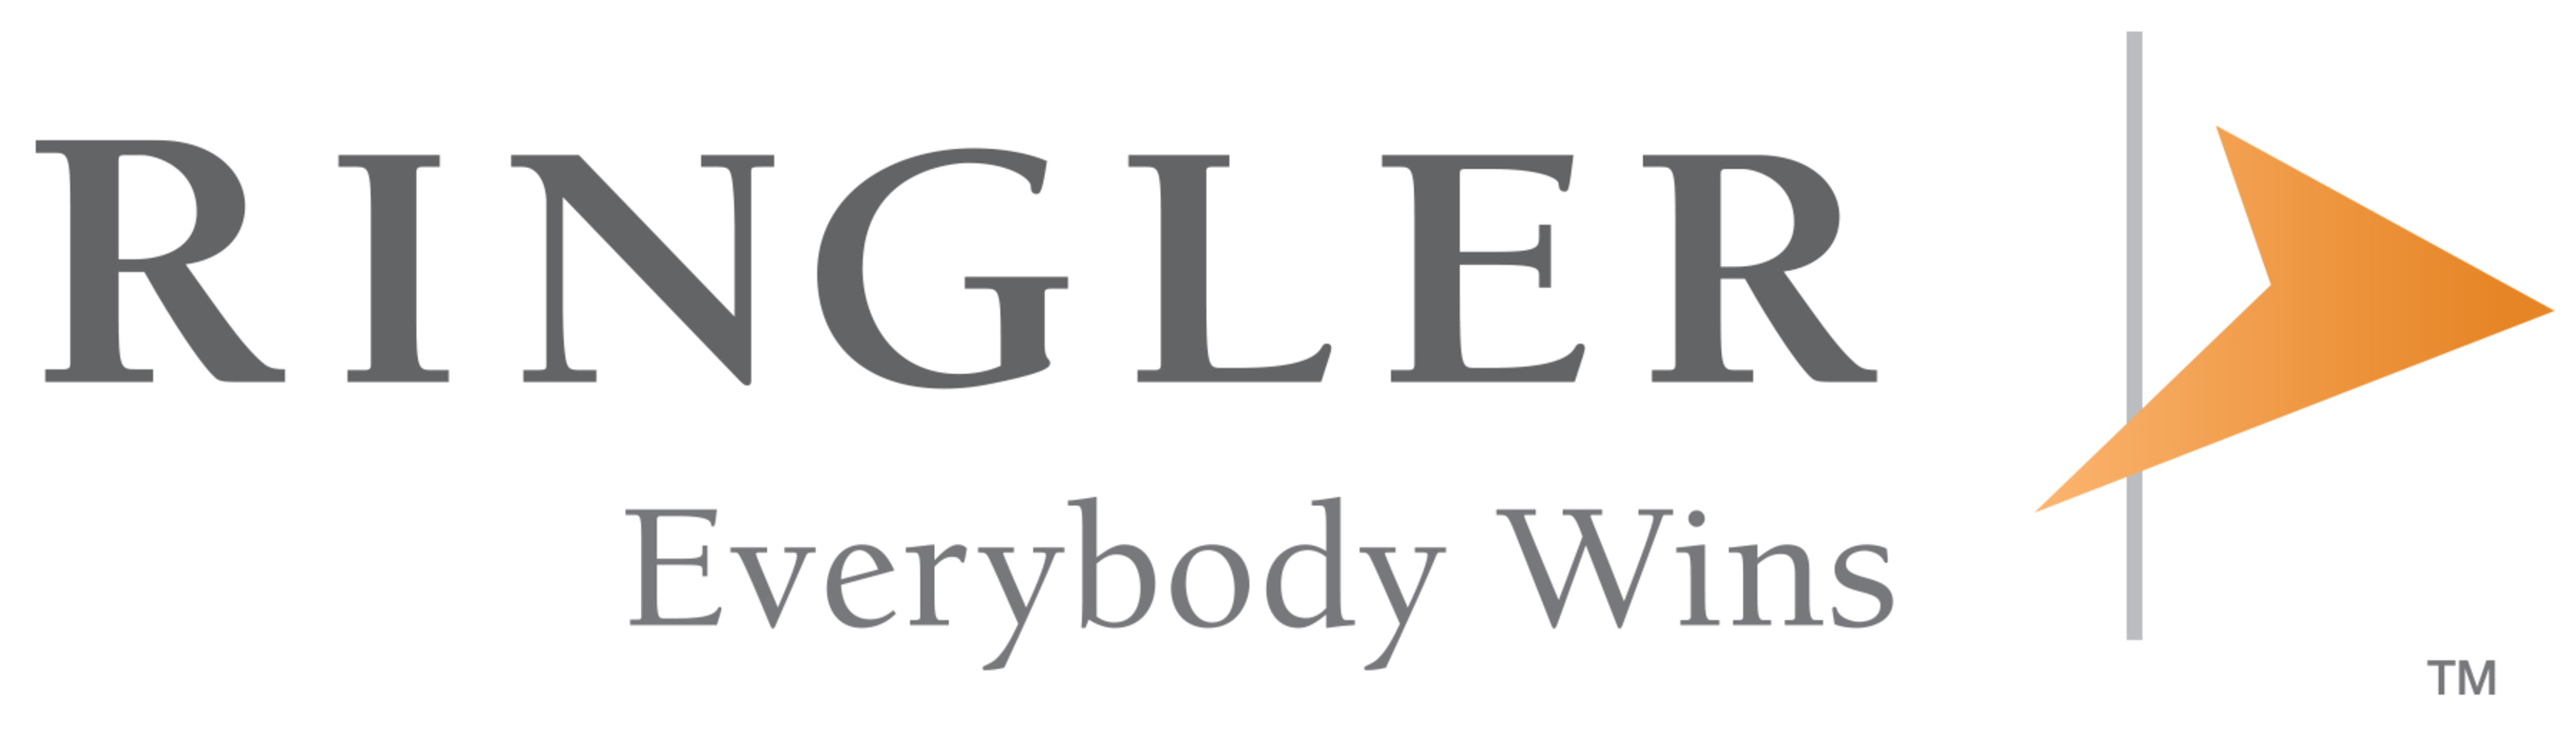 Ringler is the largest company of structured settlement advisors in the United States